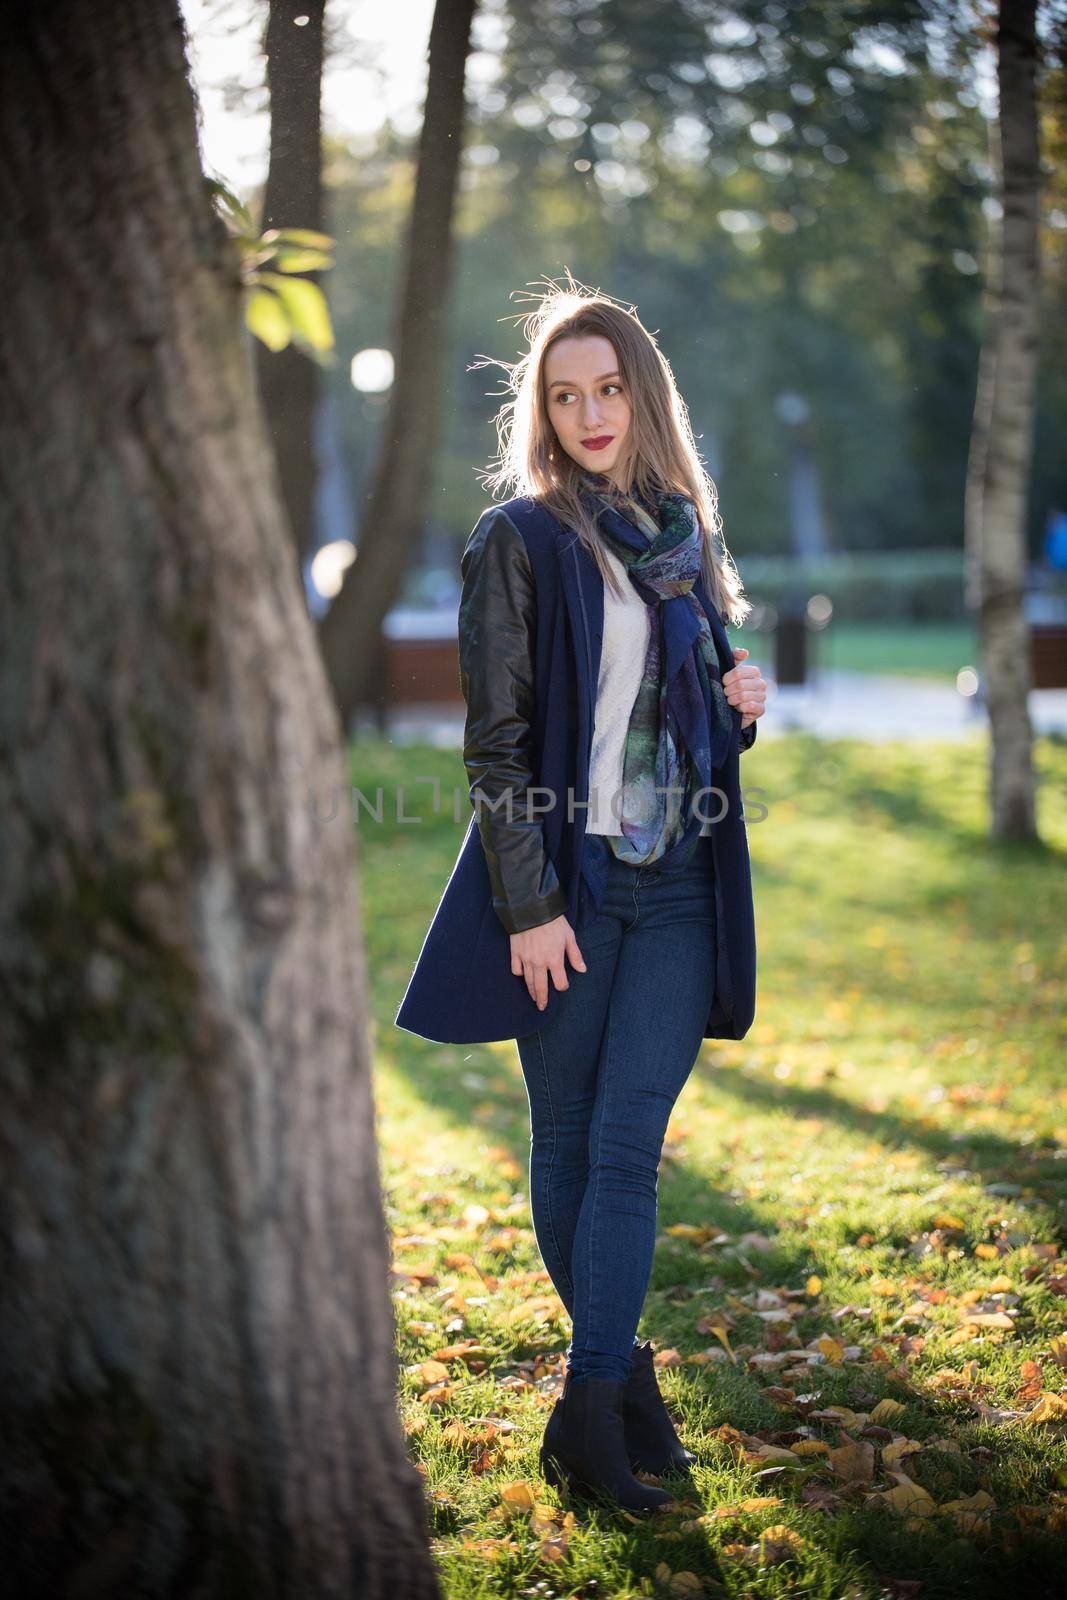 Beautiful girl with dark lipstick standing in the park. Natural daylight. Autumn. Fall season